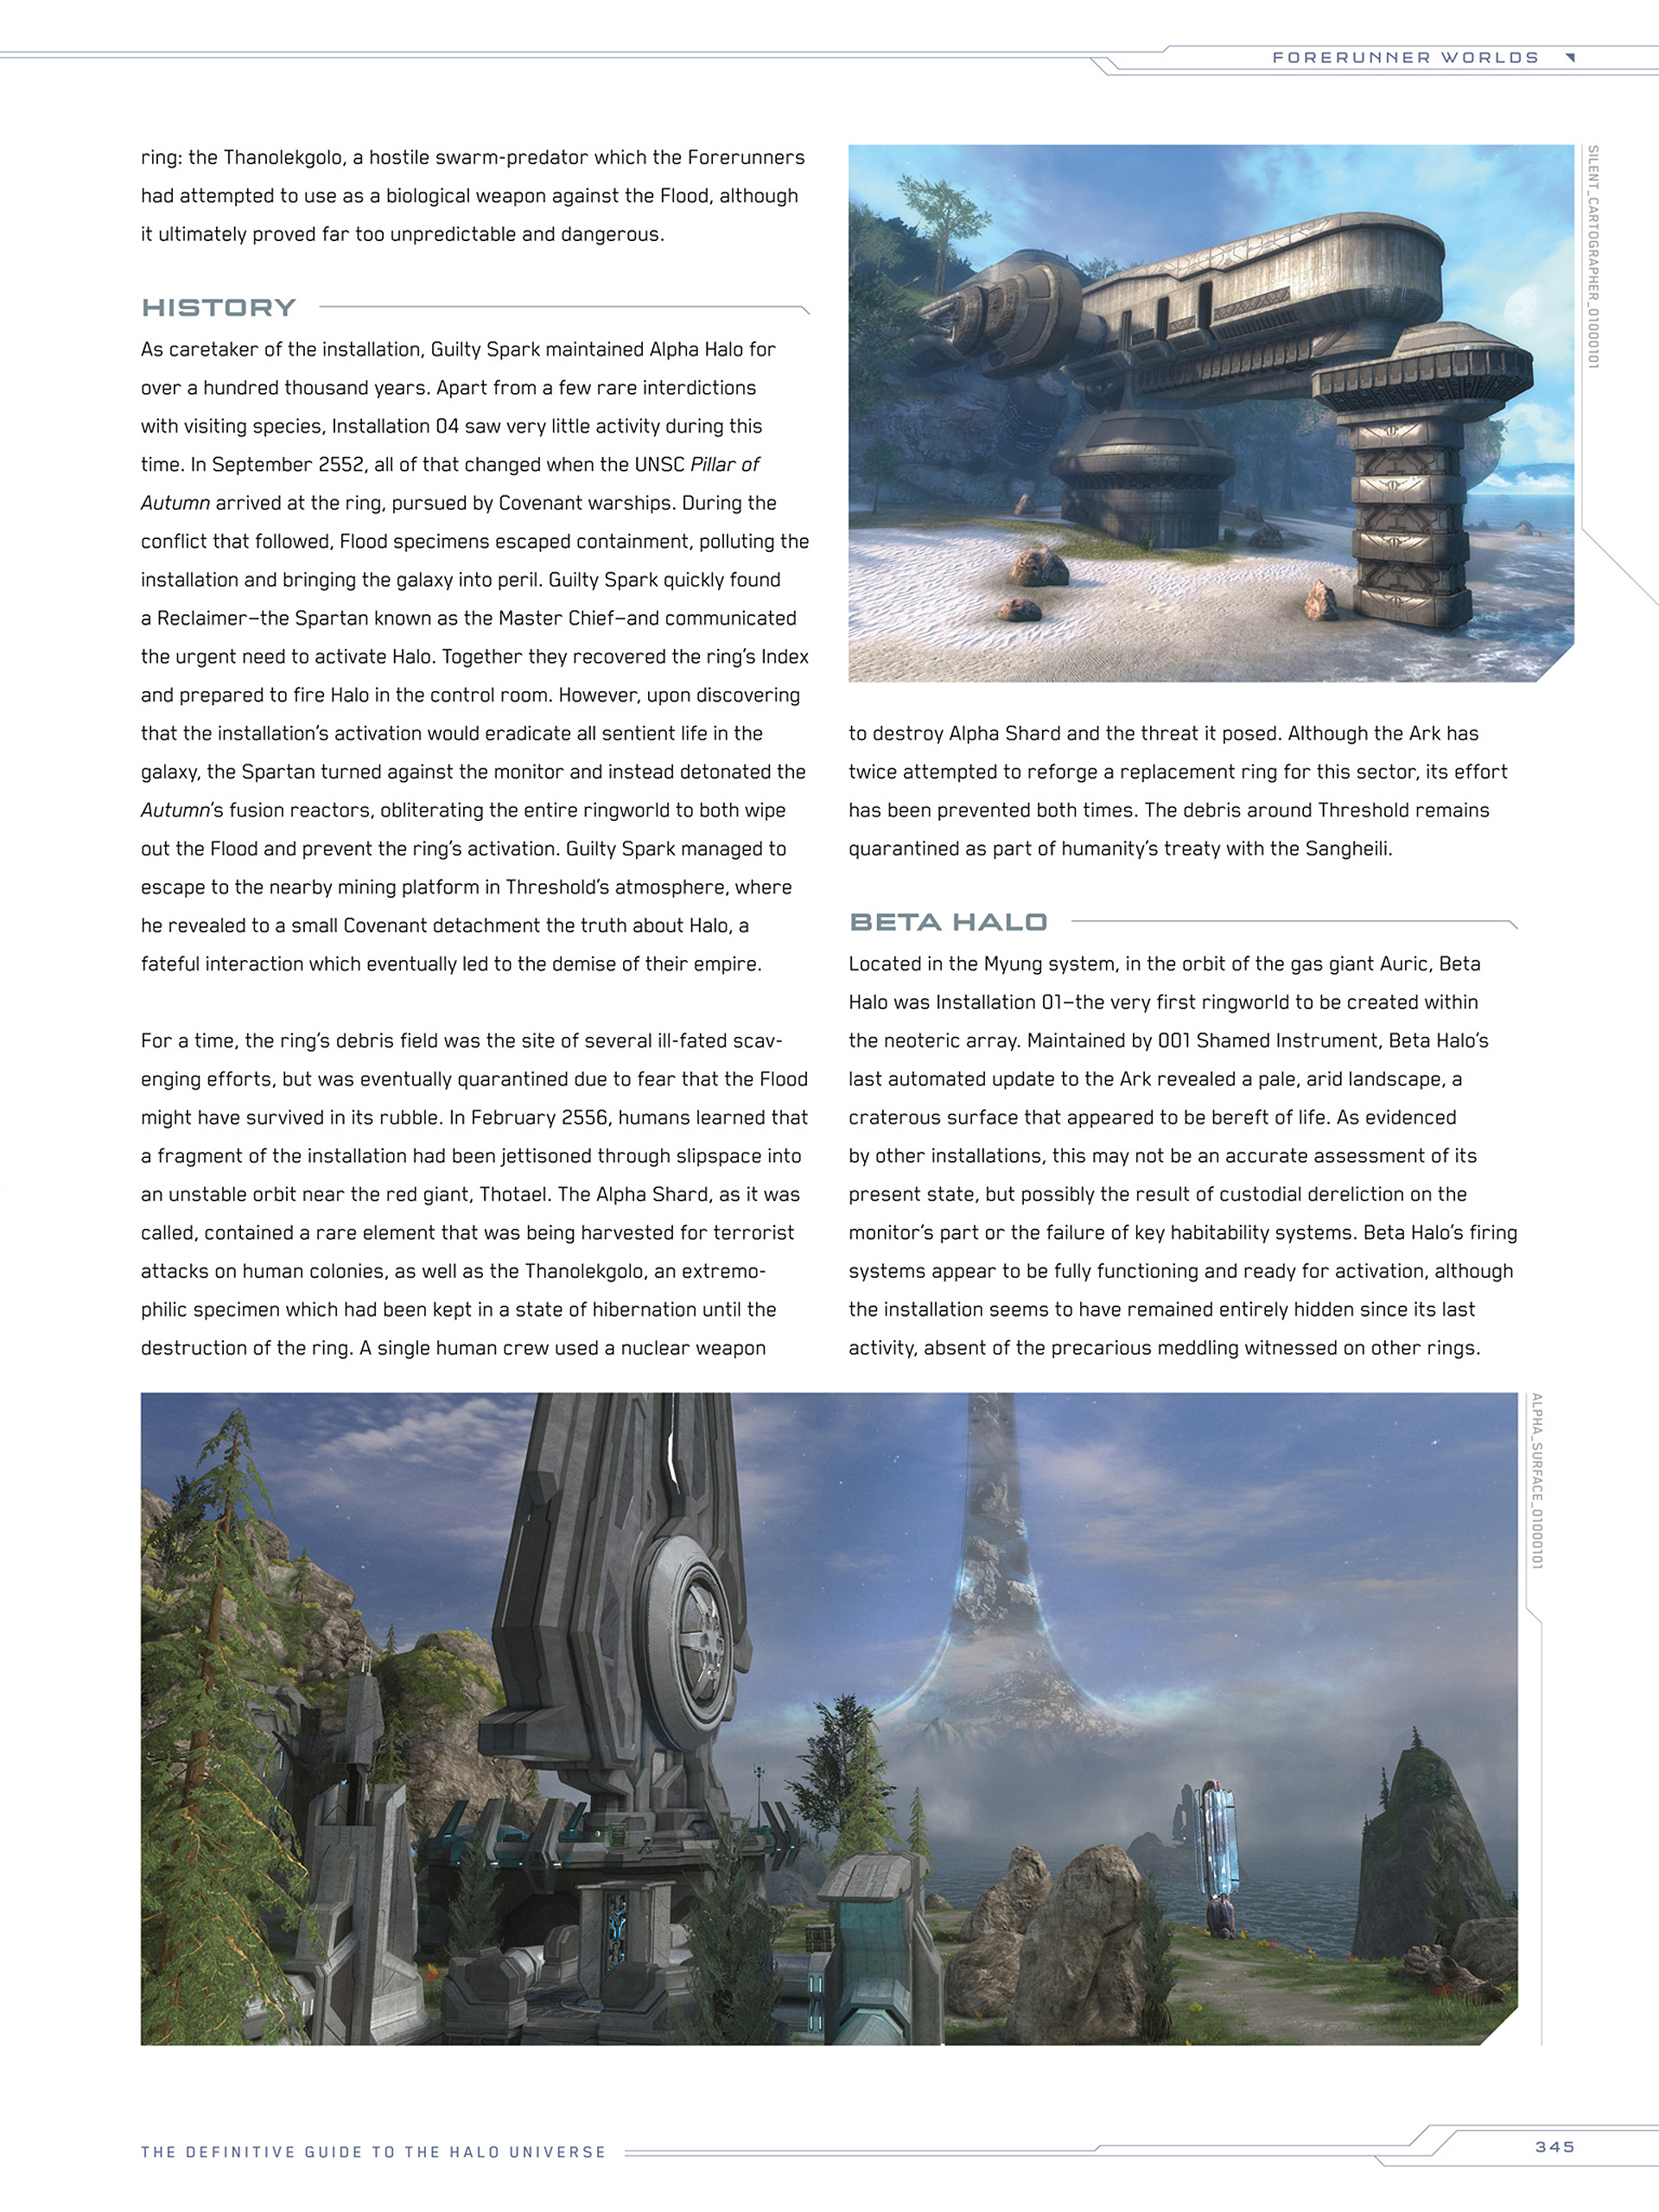 Read online Halo Encyclopedia comic -  Issue # TPB (Part 4) - 40